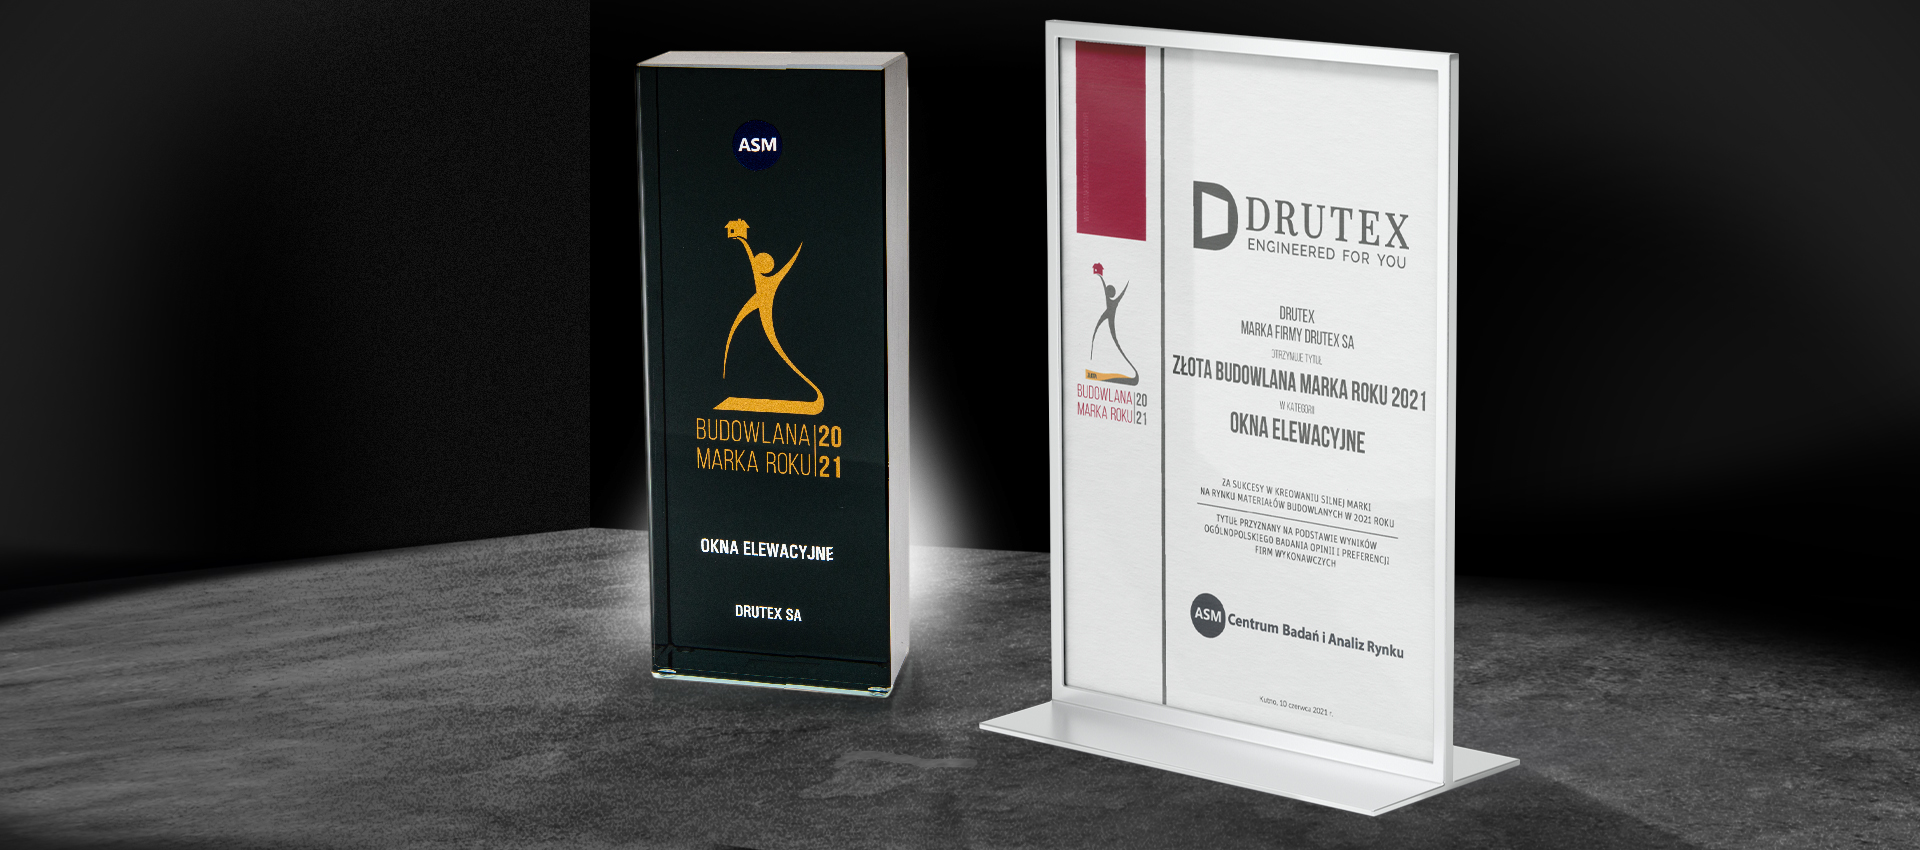 Drutex yet again is the Golden Construction Brand of the Year.